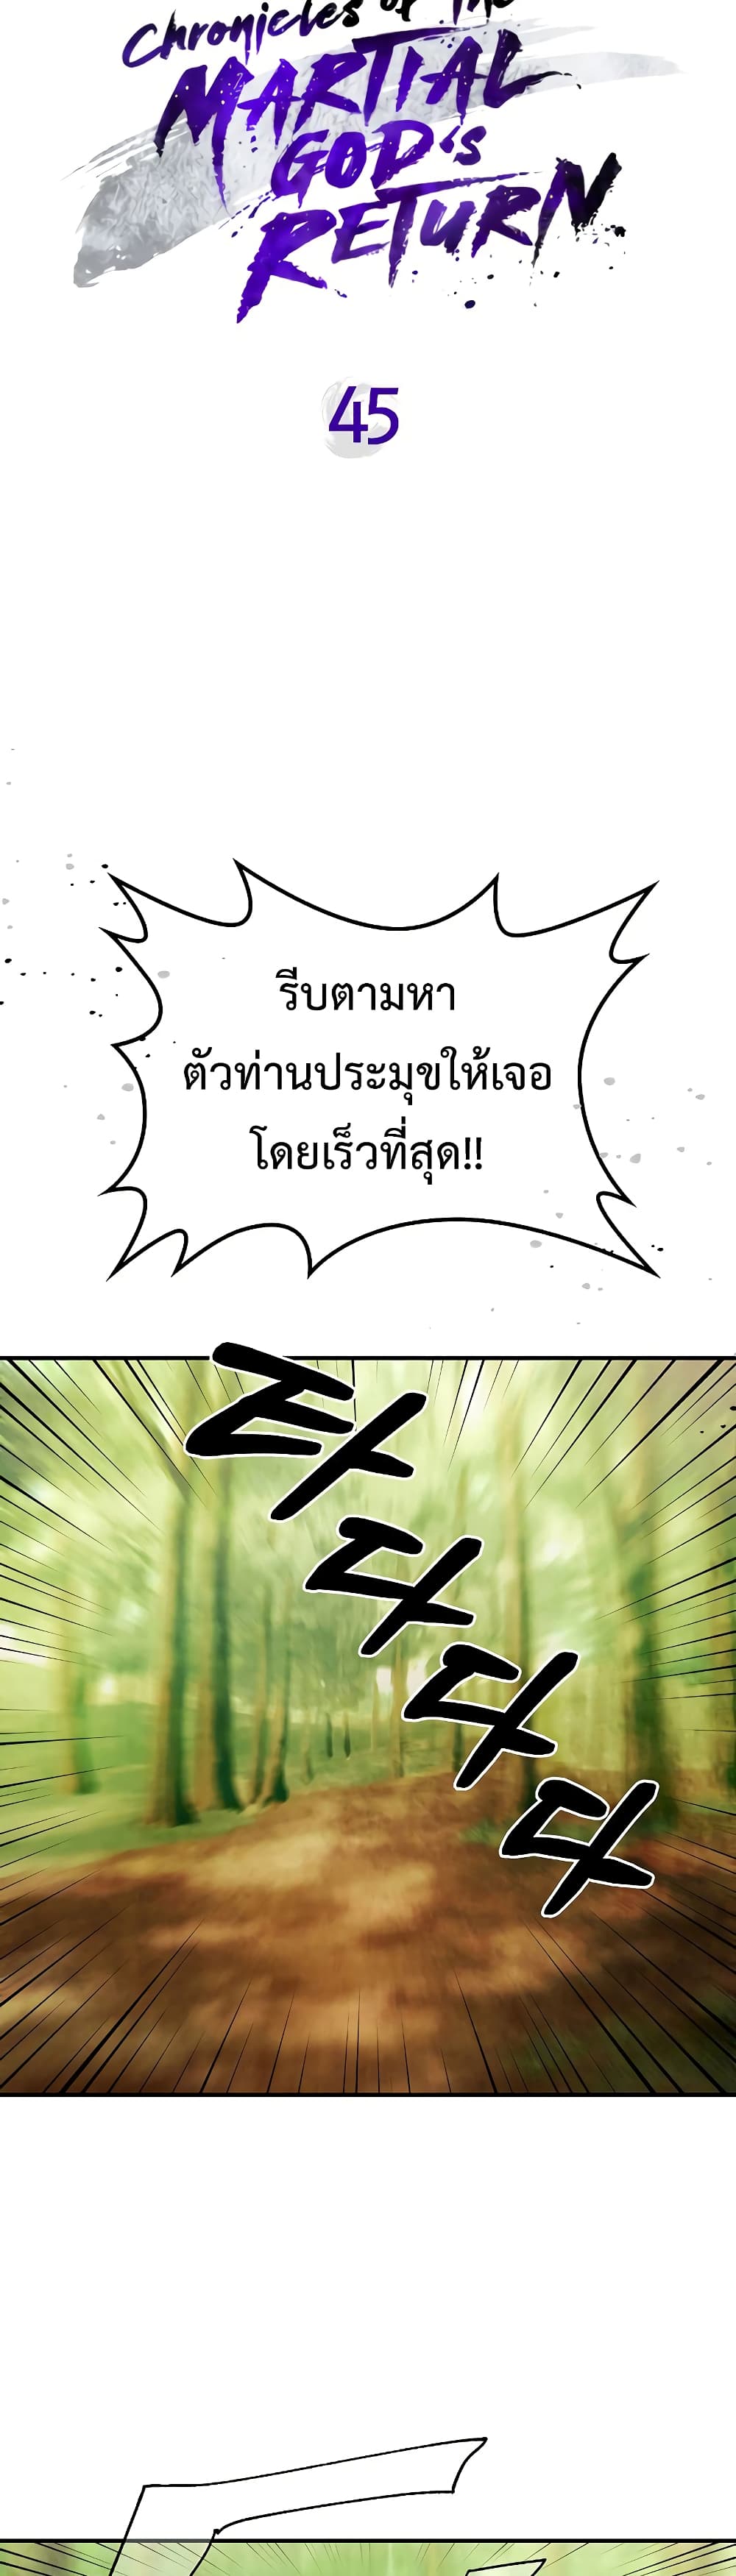 Chronicles Of The Martial God’s Return ตอนที่ 45 (4)